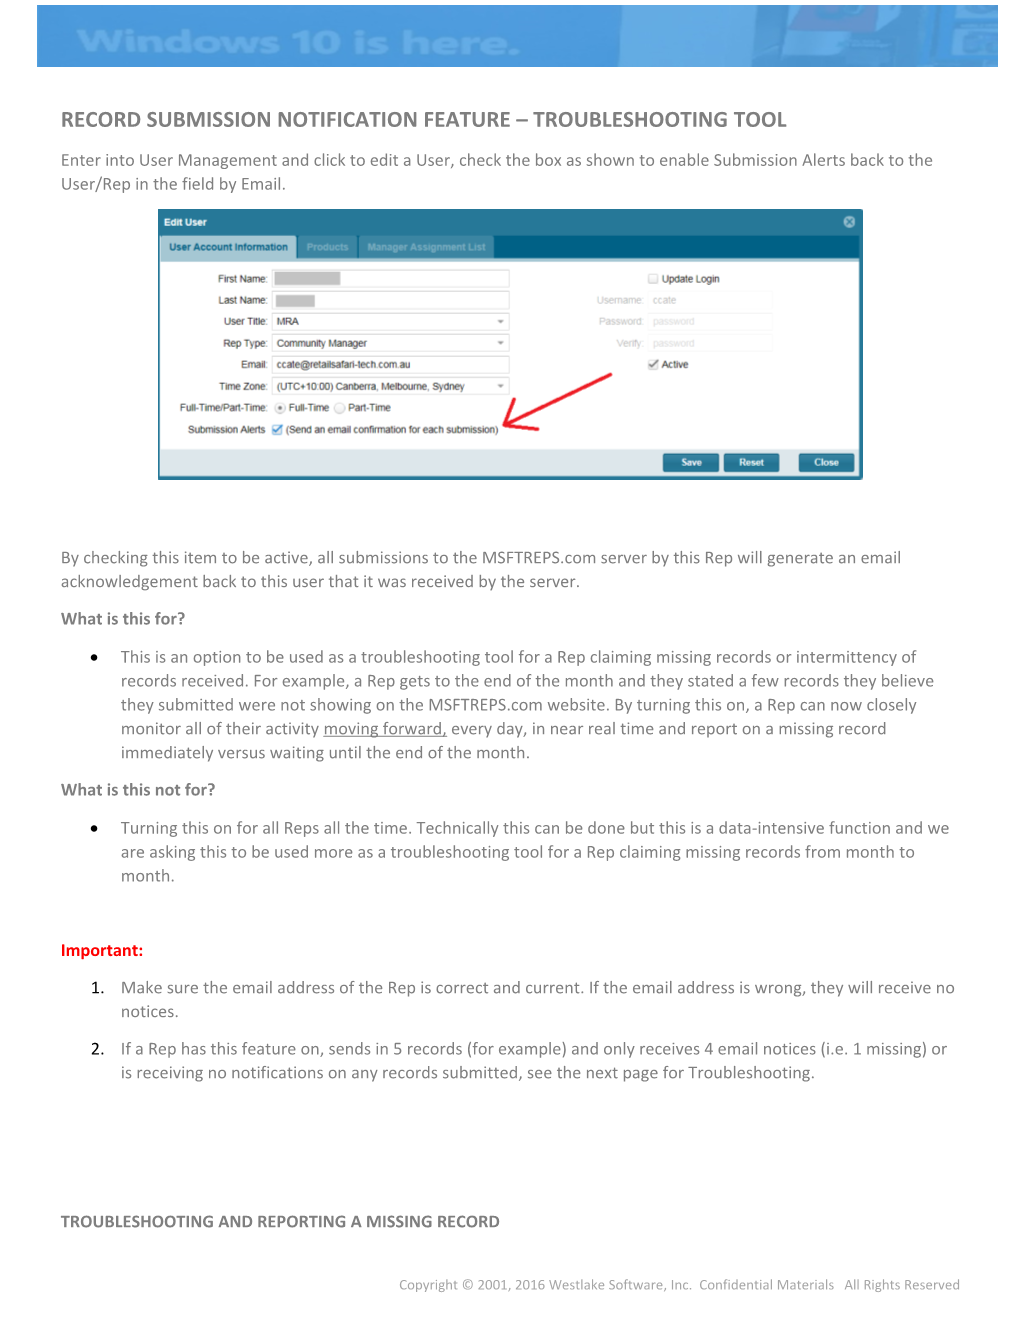 Record Submission Notification Feature Troubleshooting Tool